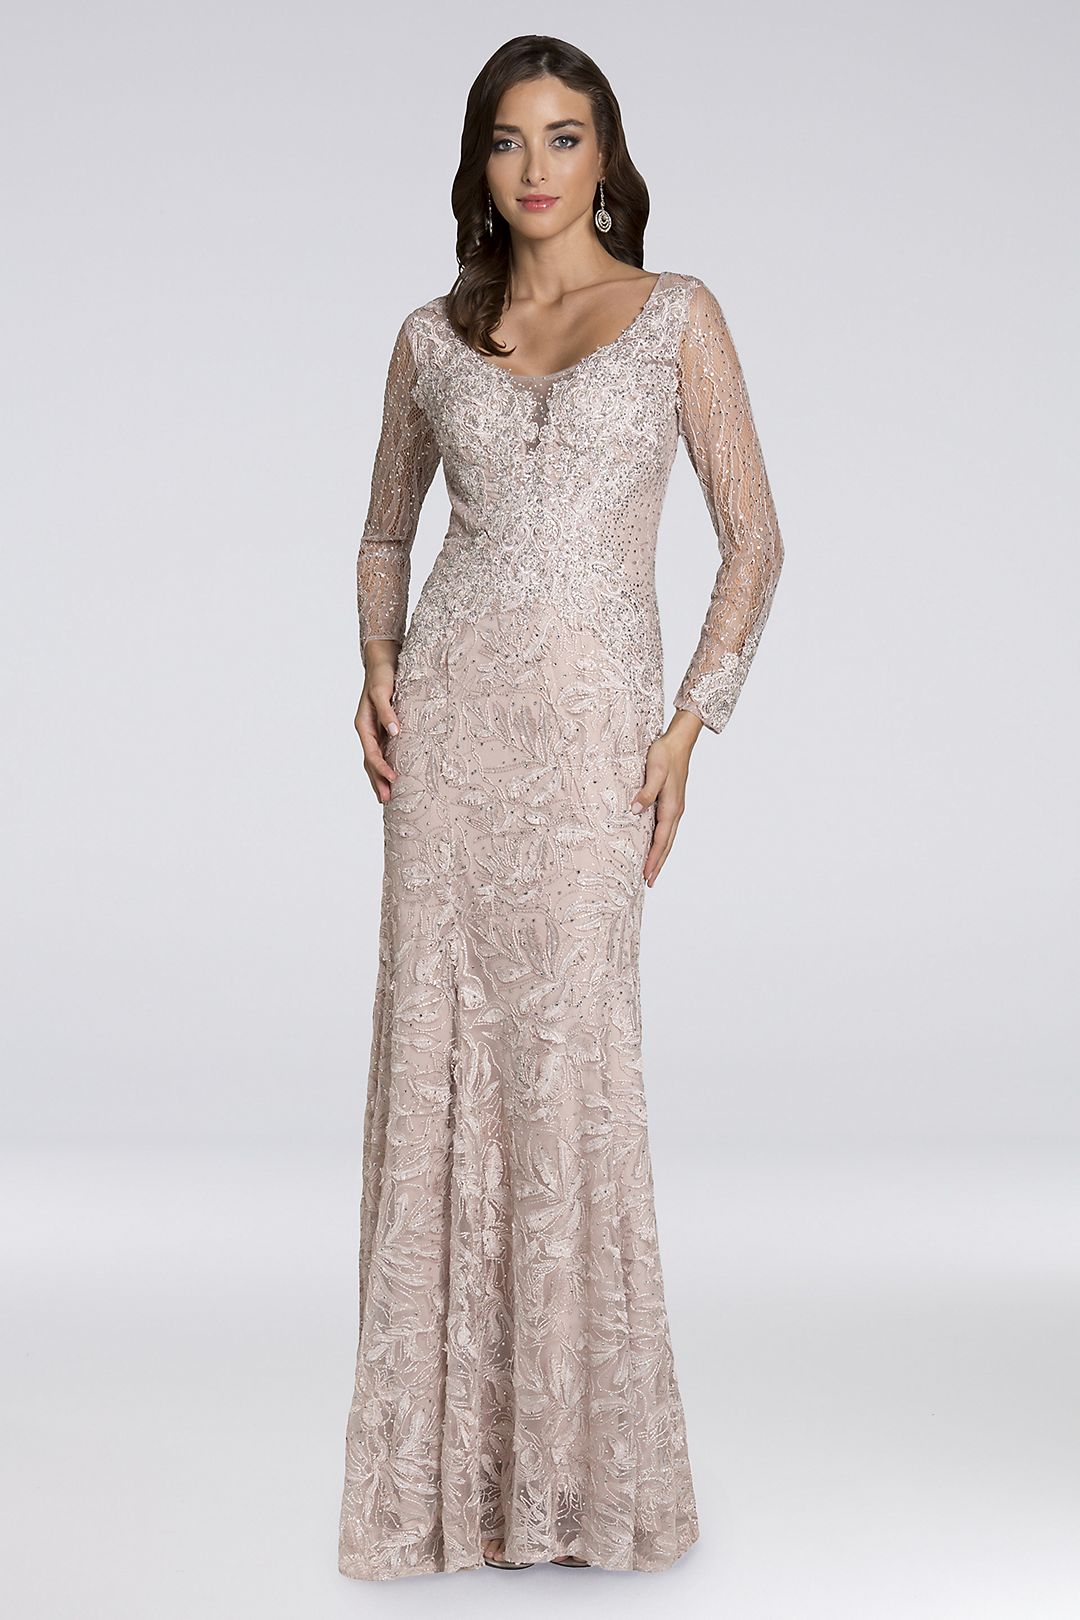 Lara Beth Lace Long-Sleeve Gown Image 1